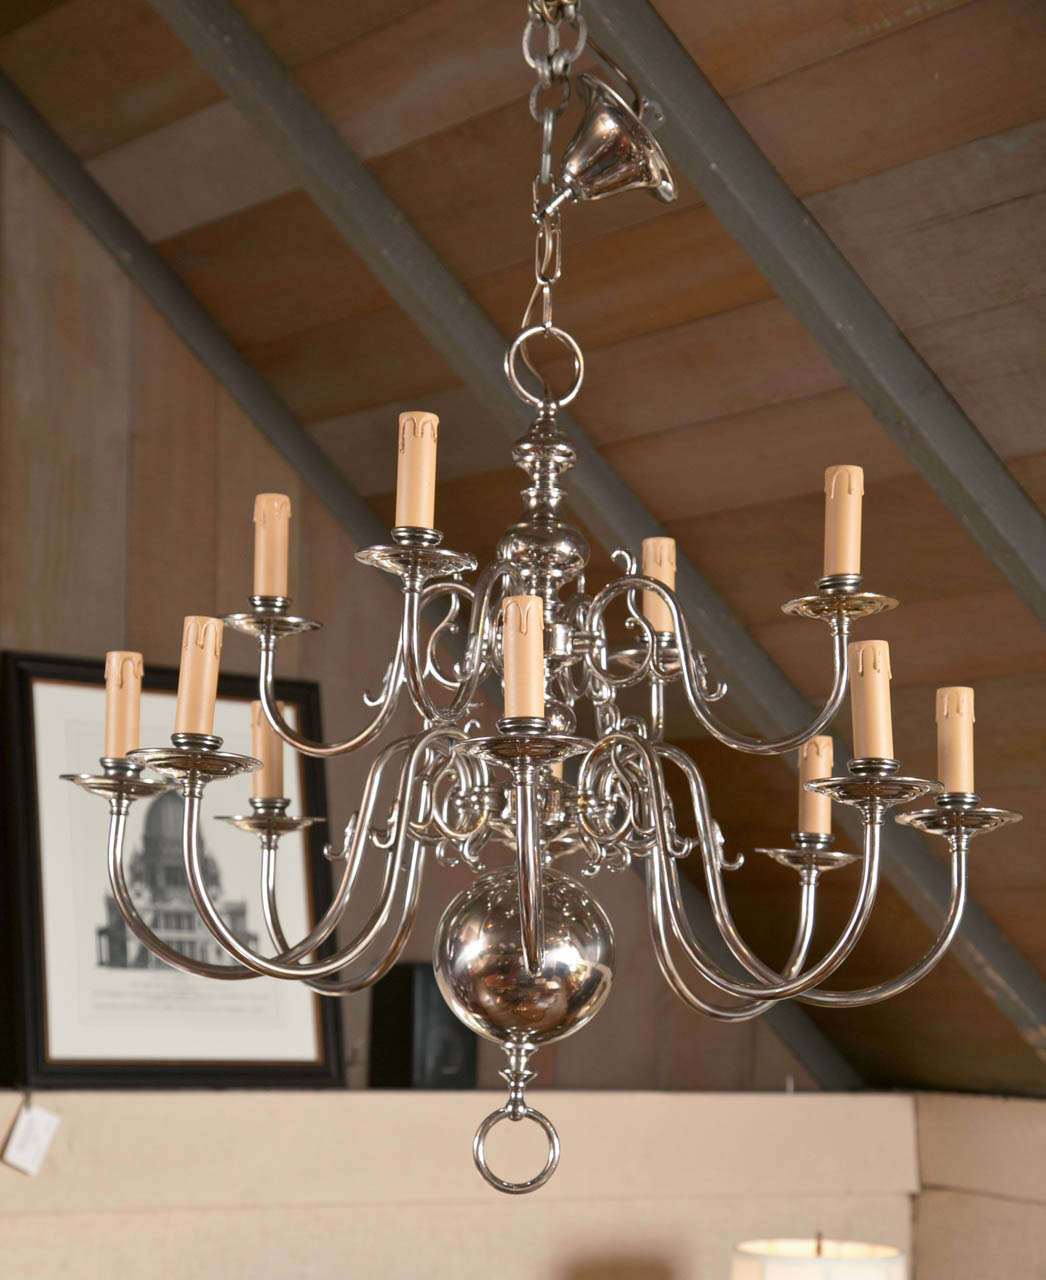 Instead of the more common six-over-six setup of arms, this chandelier opts for four-over-eight, allowing for a lower (closer to the table) distribution of light. Coated in a shiny layer of nickel, it also breaks from the golden brass tradition,